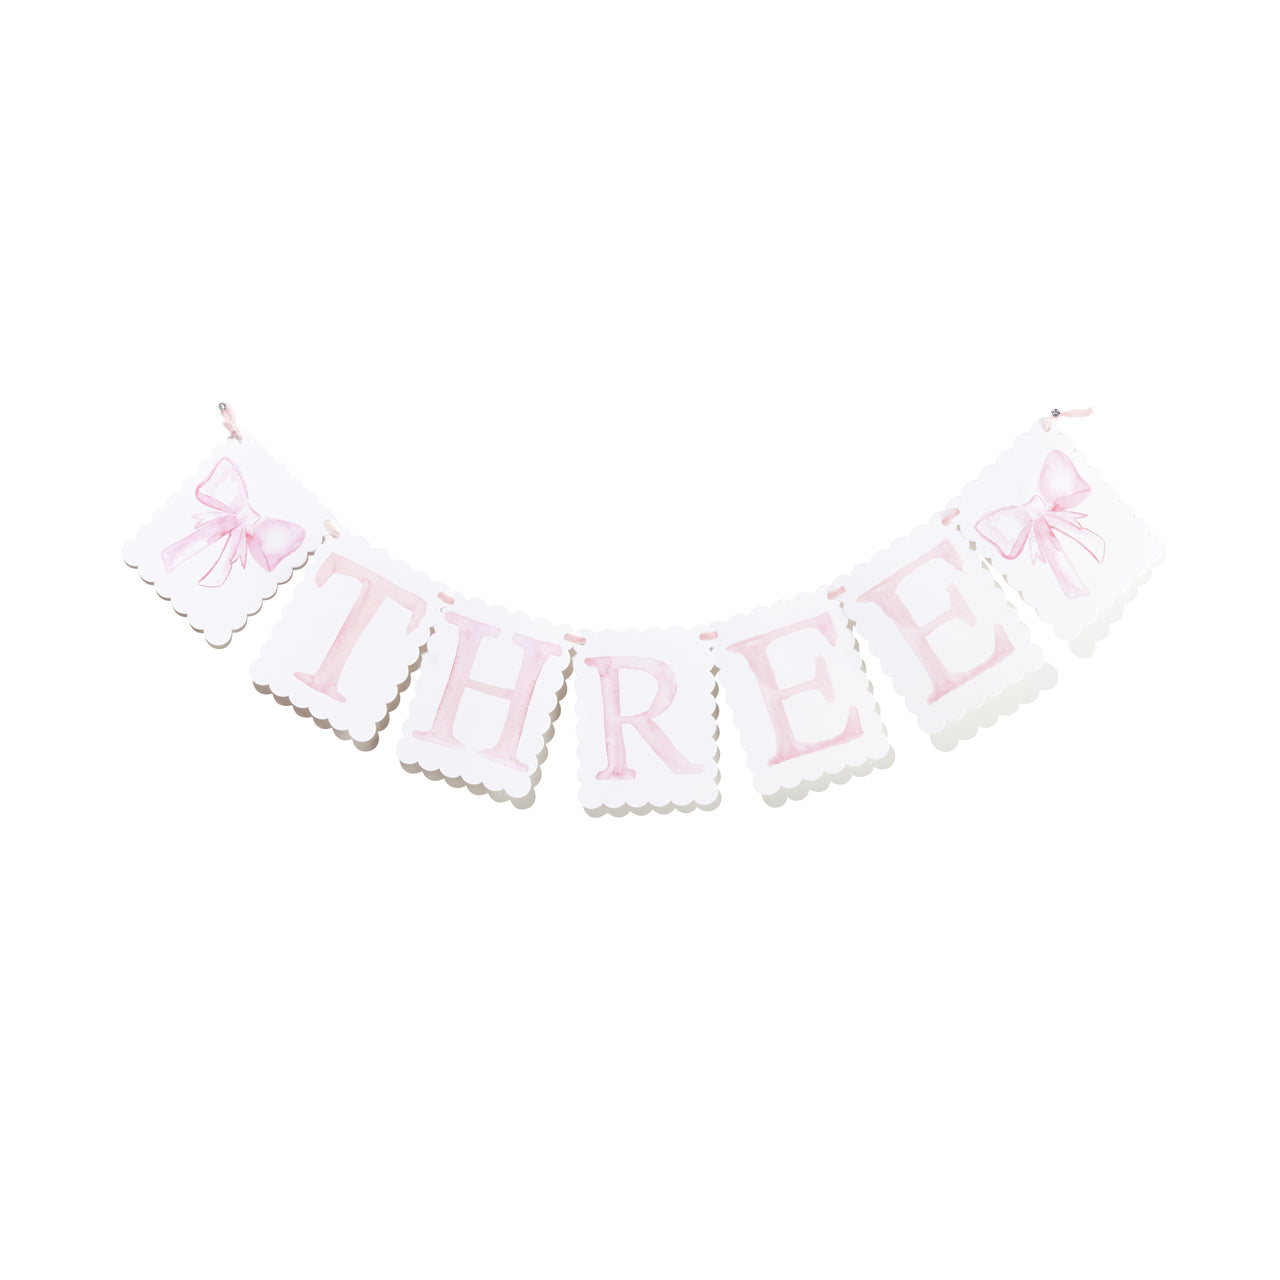 "THREE" Birthday Banner with Ballerina/ Bow Endpieces